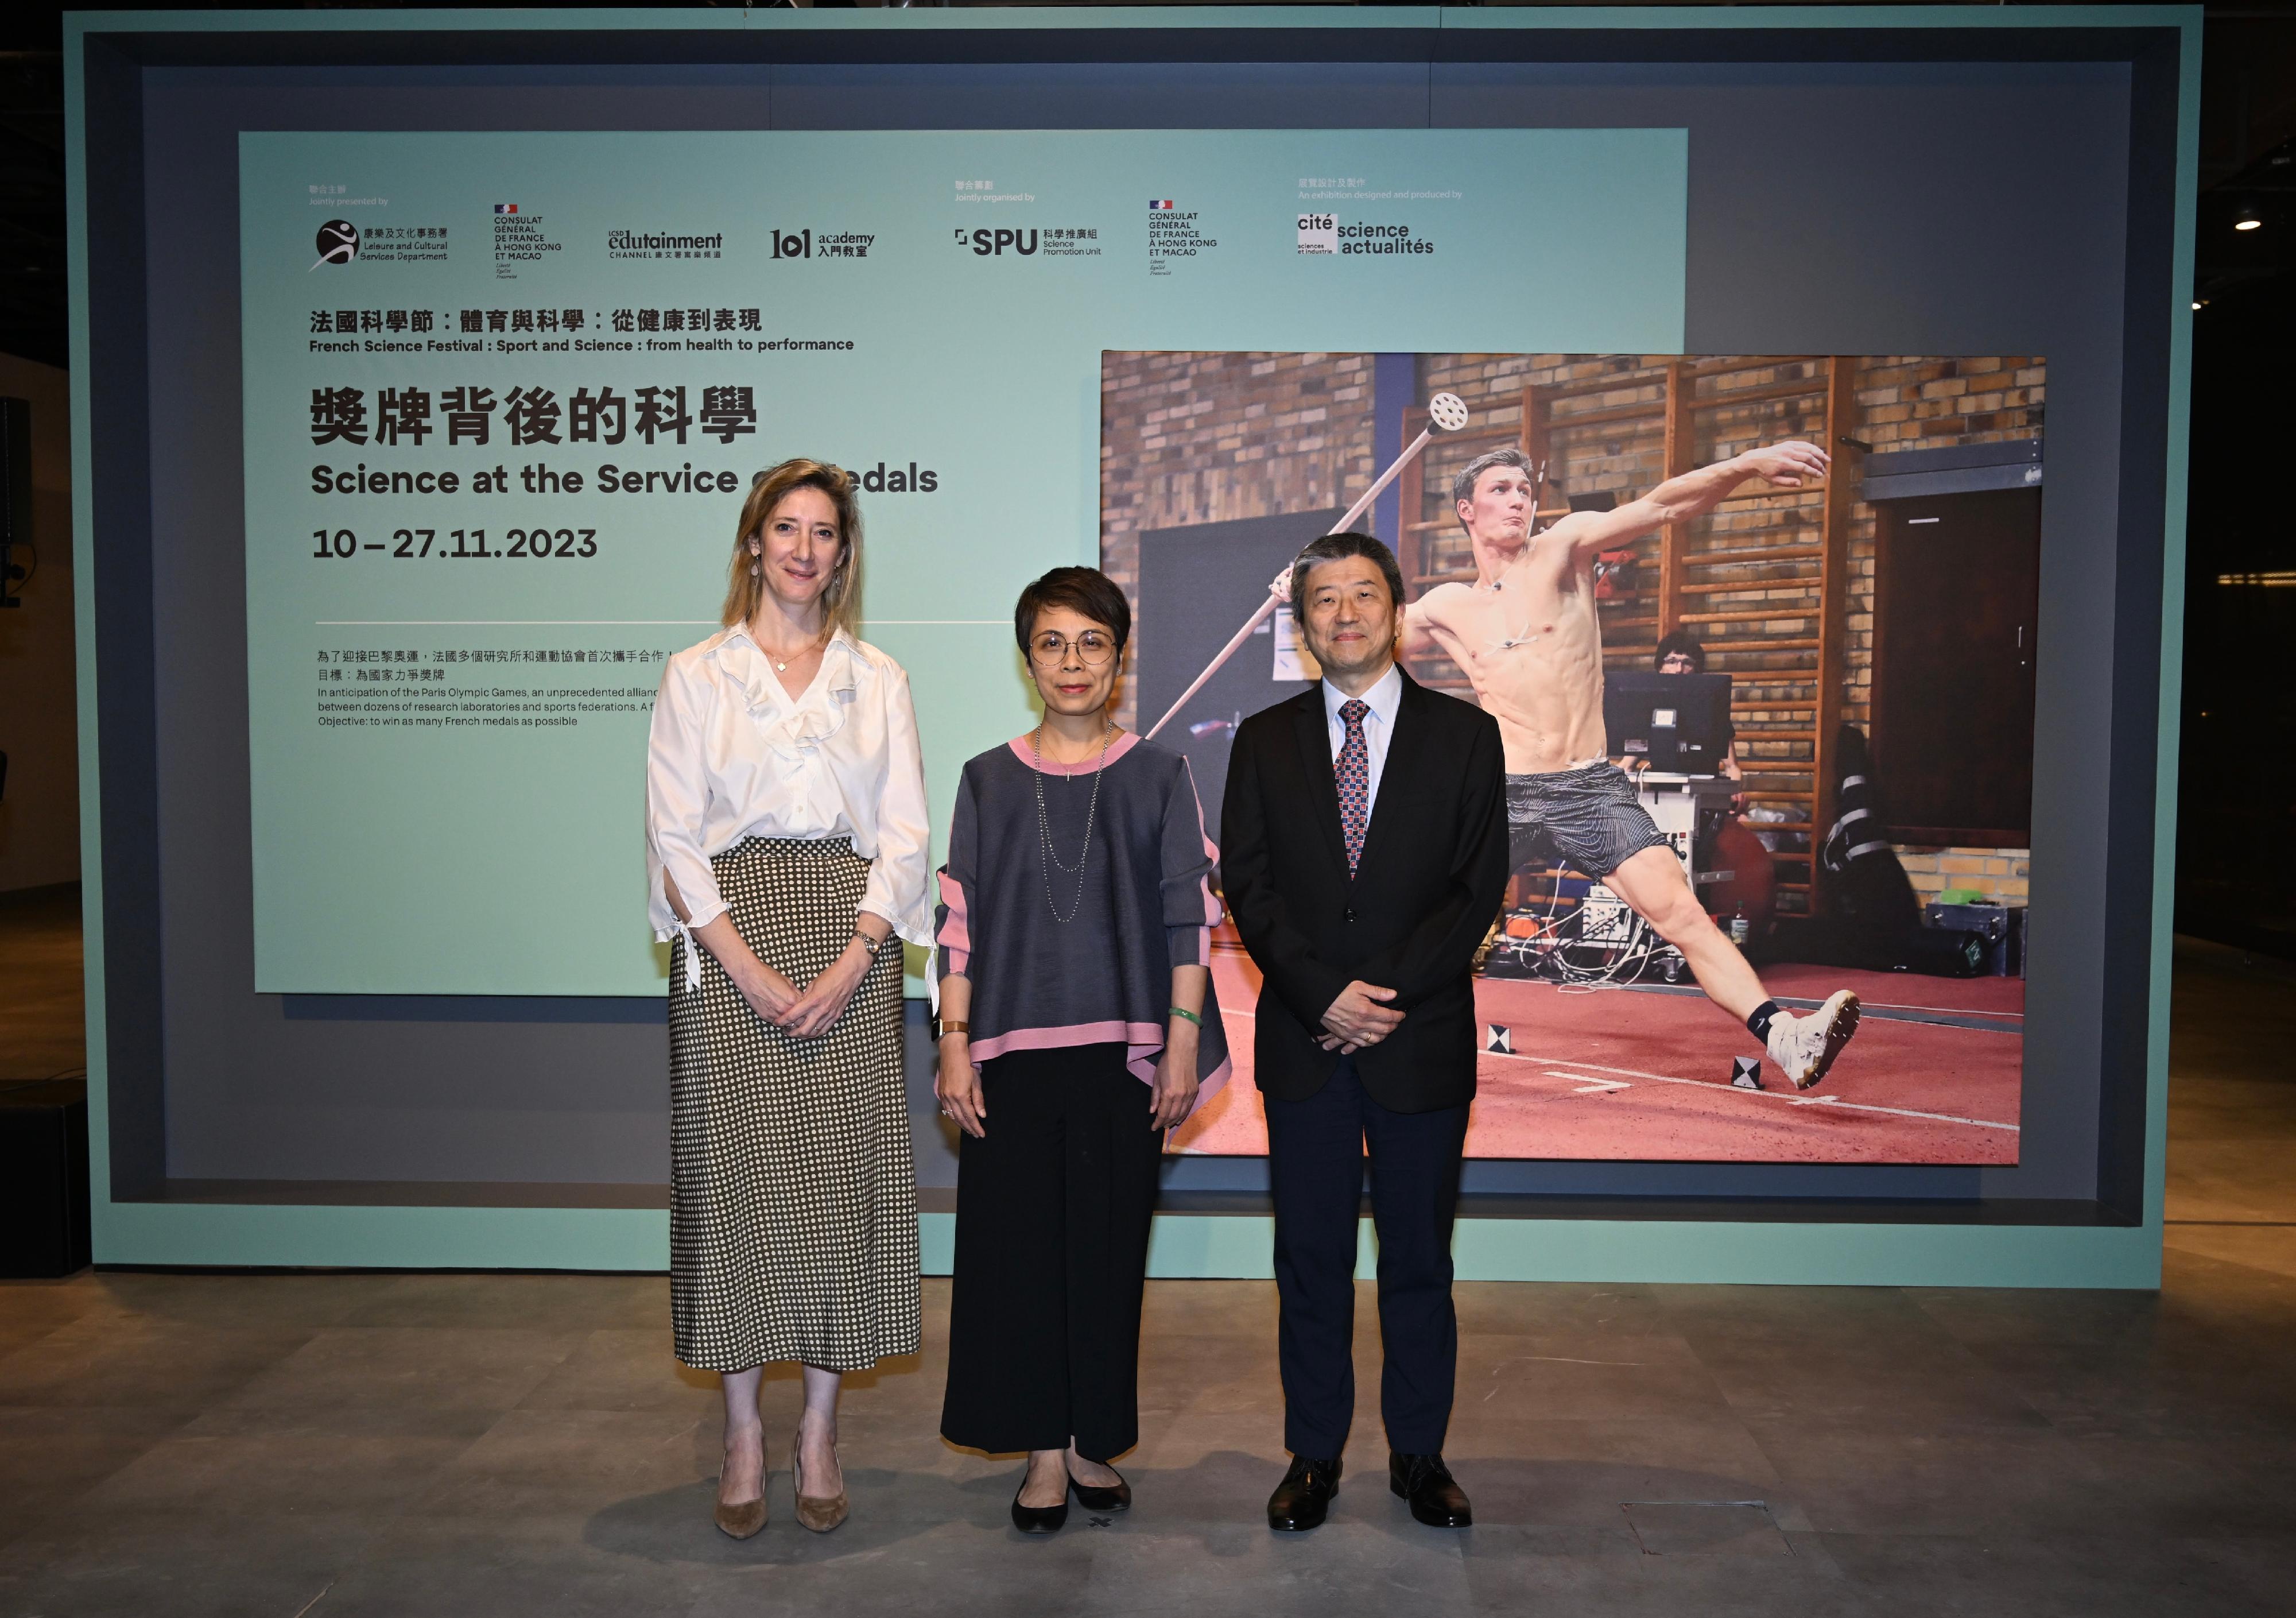 The opening ceremony for the French Science Festival "Science at the Service of Medals" exhibition was held today (November 9) at the Hong Kong Science Museum. Photo shows (from left) the Consul General of France in Hong Kong and Macau, Mrs Christile Drulhe; the Deputy Director of Leisure and Cultural Services (Culture), Miss Eve Tam; and the Museum Director of the Hong Kong Science Museum, Mr Lawrence Lee, officiating at the ceremony.